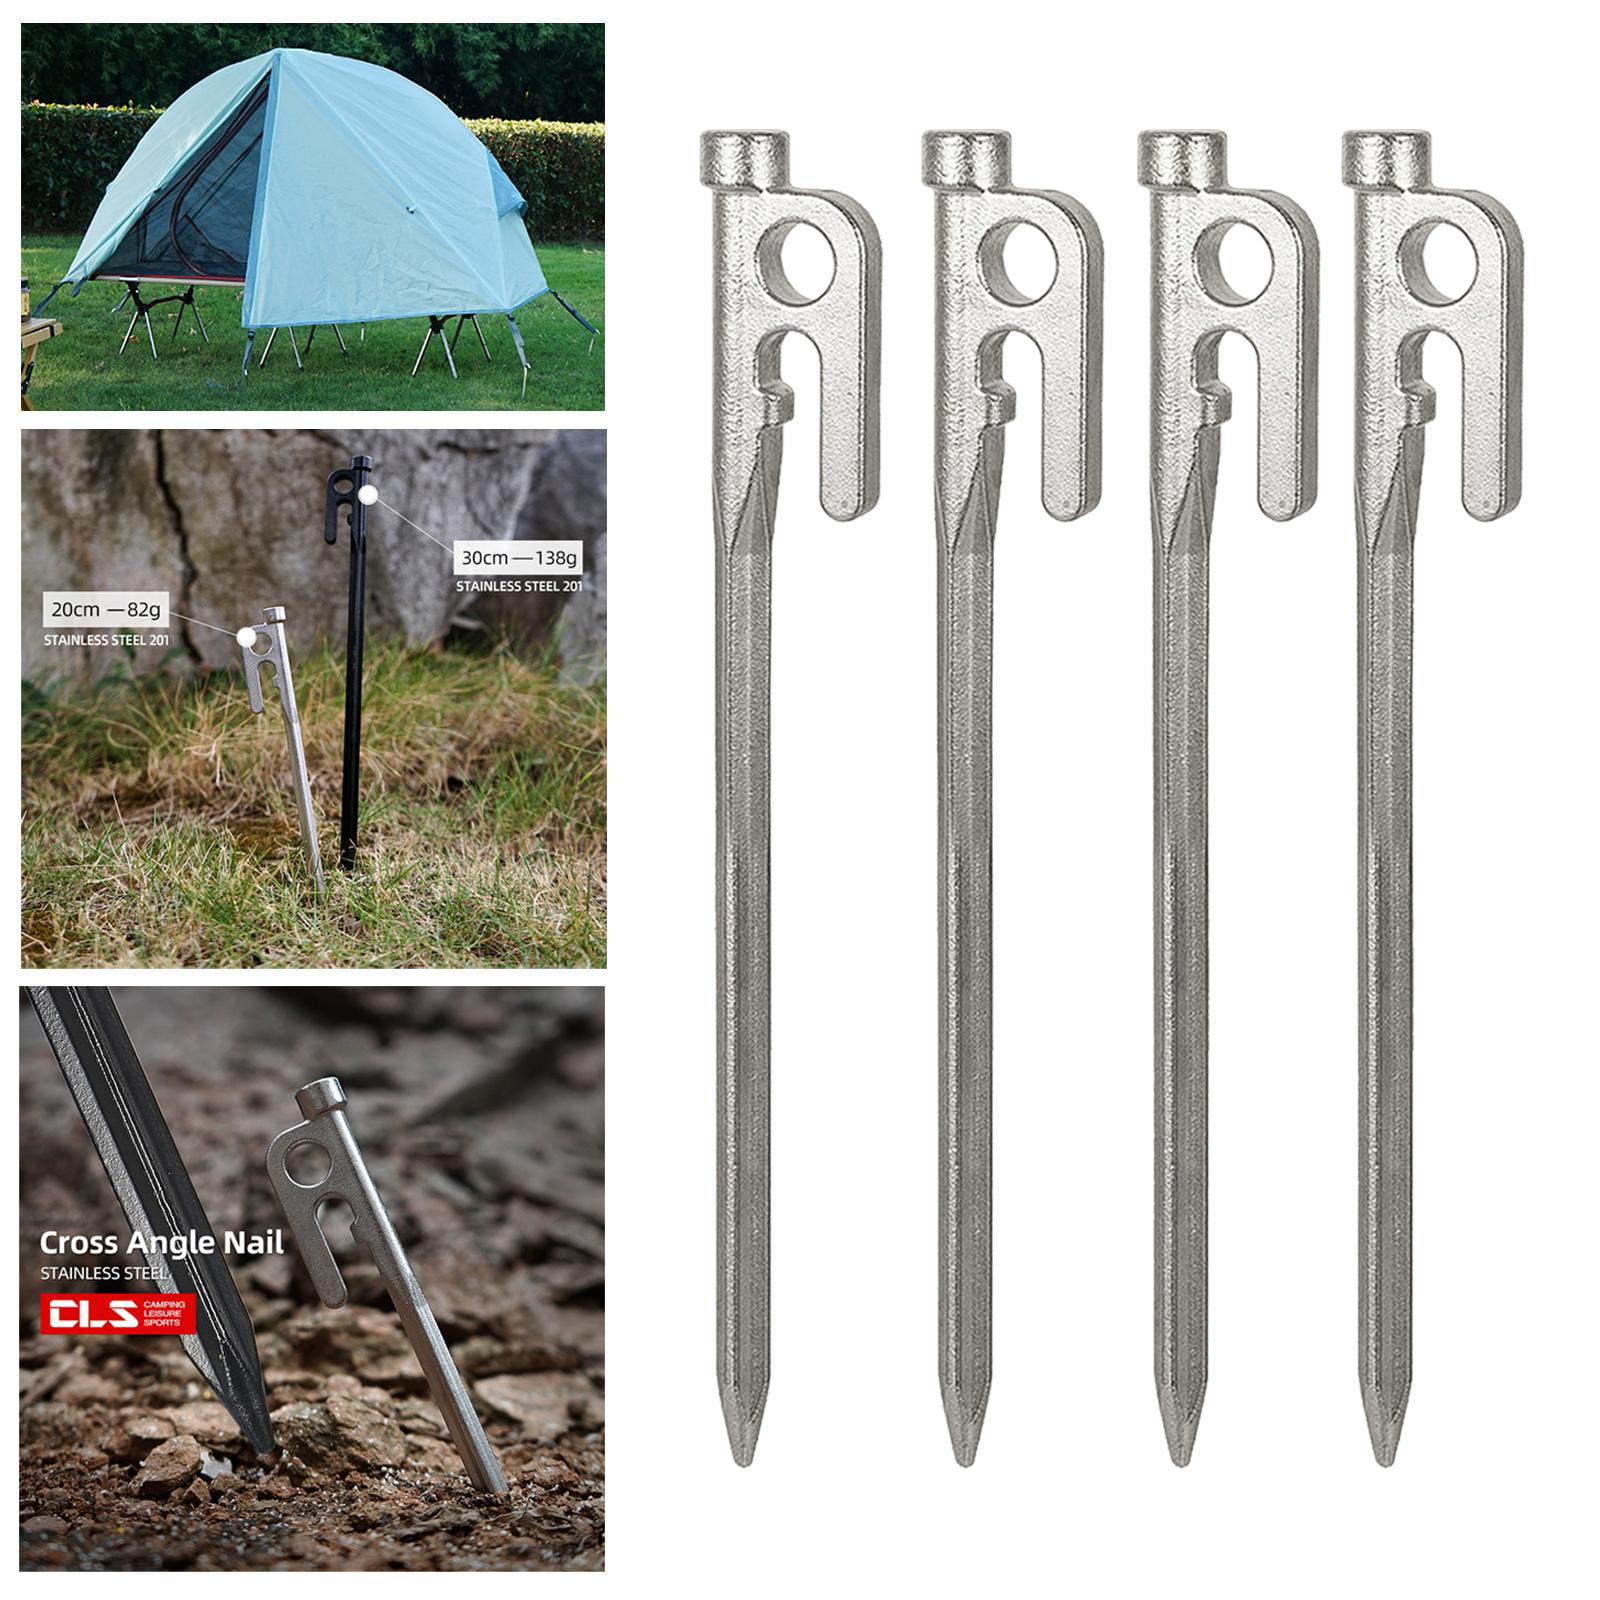 Tent Stakes Heavy Duty Tent Nail Camping Stakes,Tent pegs Canopy, Ground,  Garden, 201 Stainless Steel Stakes 4pc-Pack - 20cm 